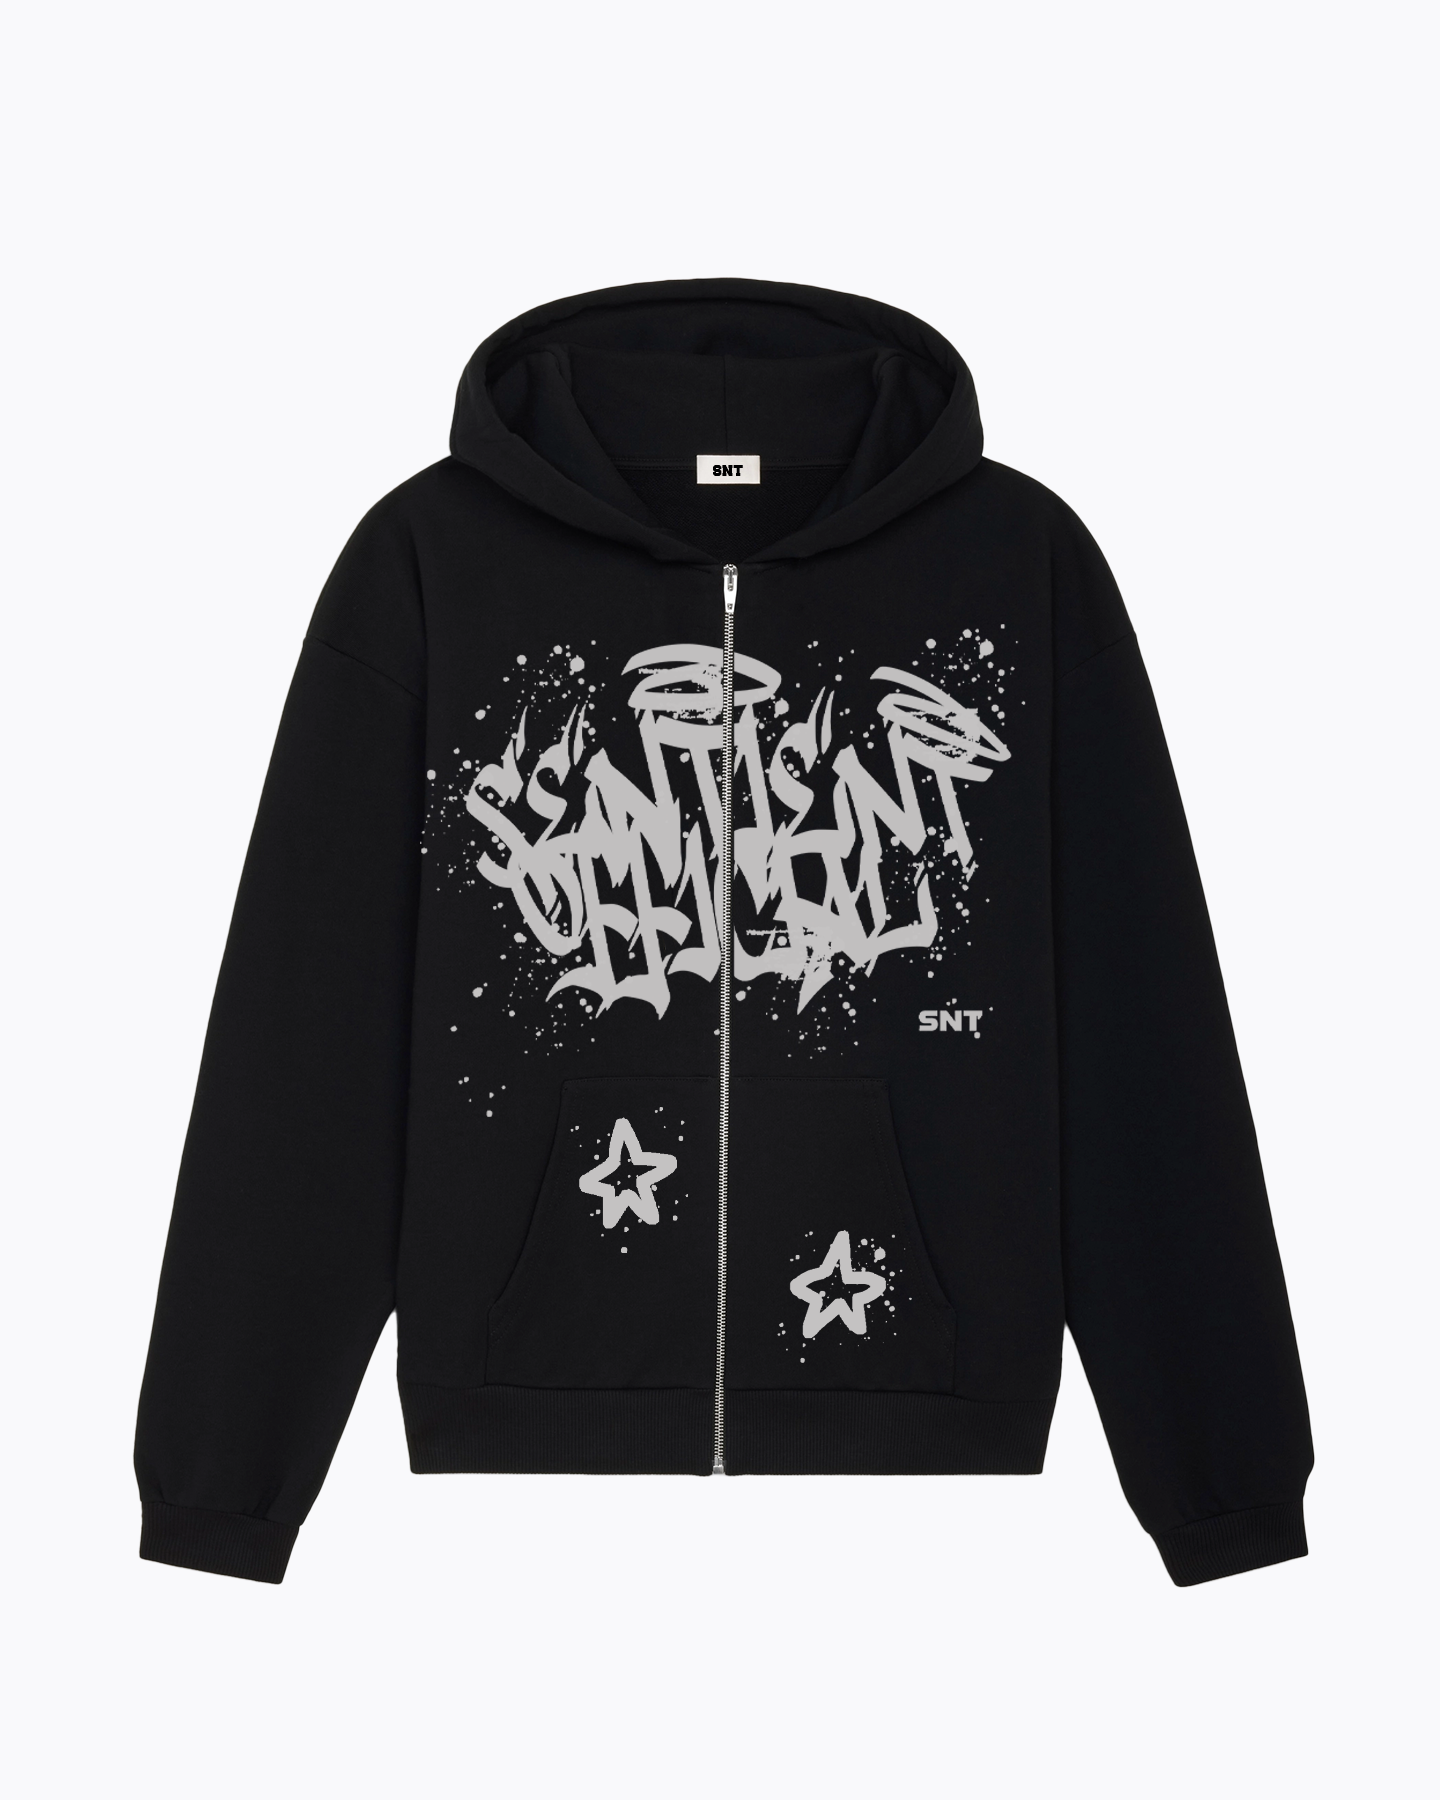 PREVIEW ONLY* SNT Graffiti Zip Hoodie